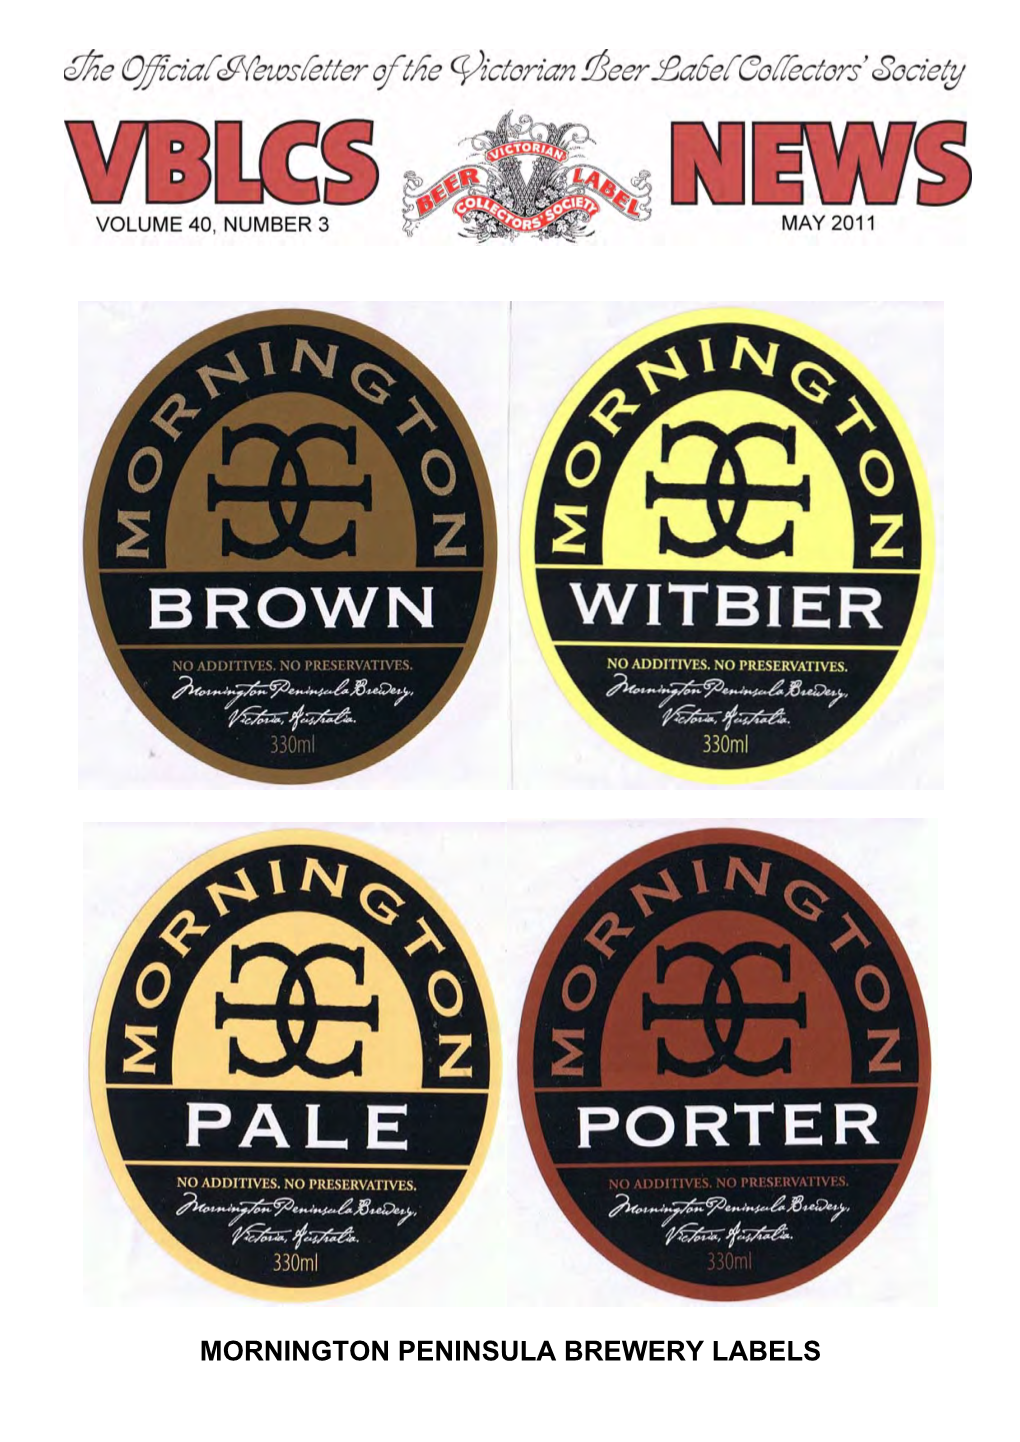 Mornington Peninsula Brewery Labels the Committee 2